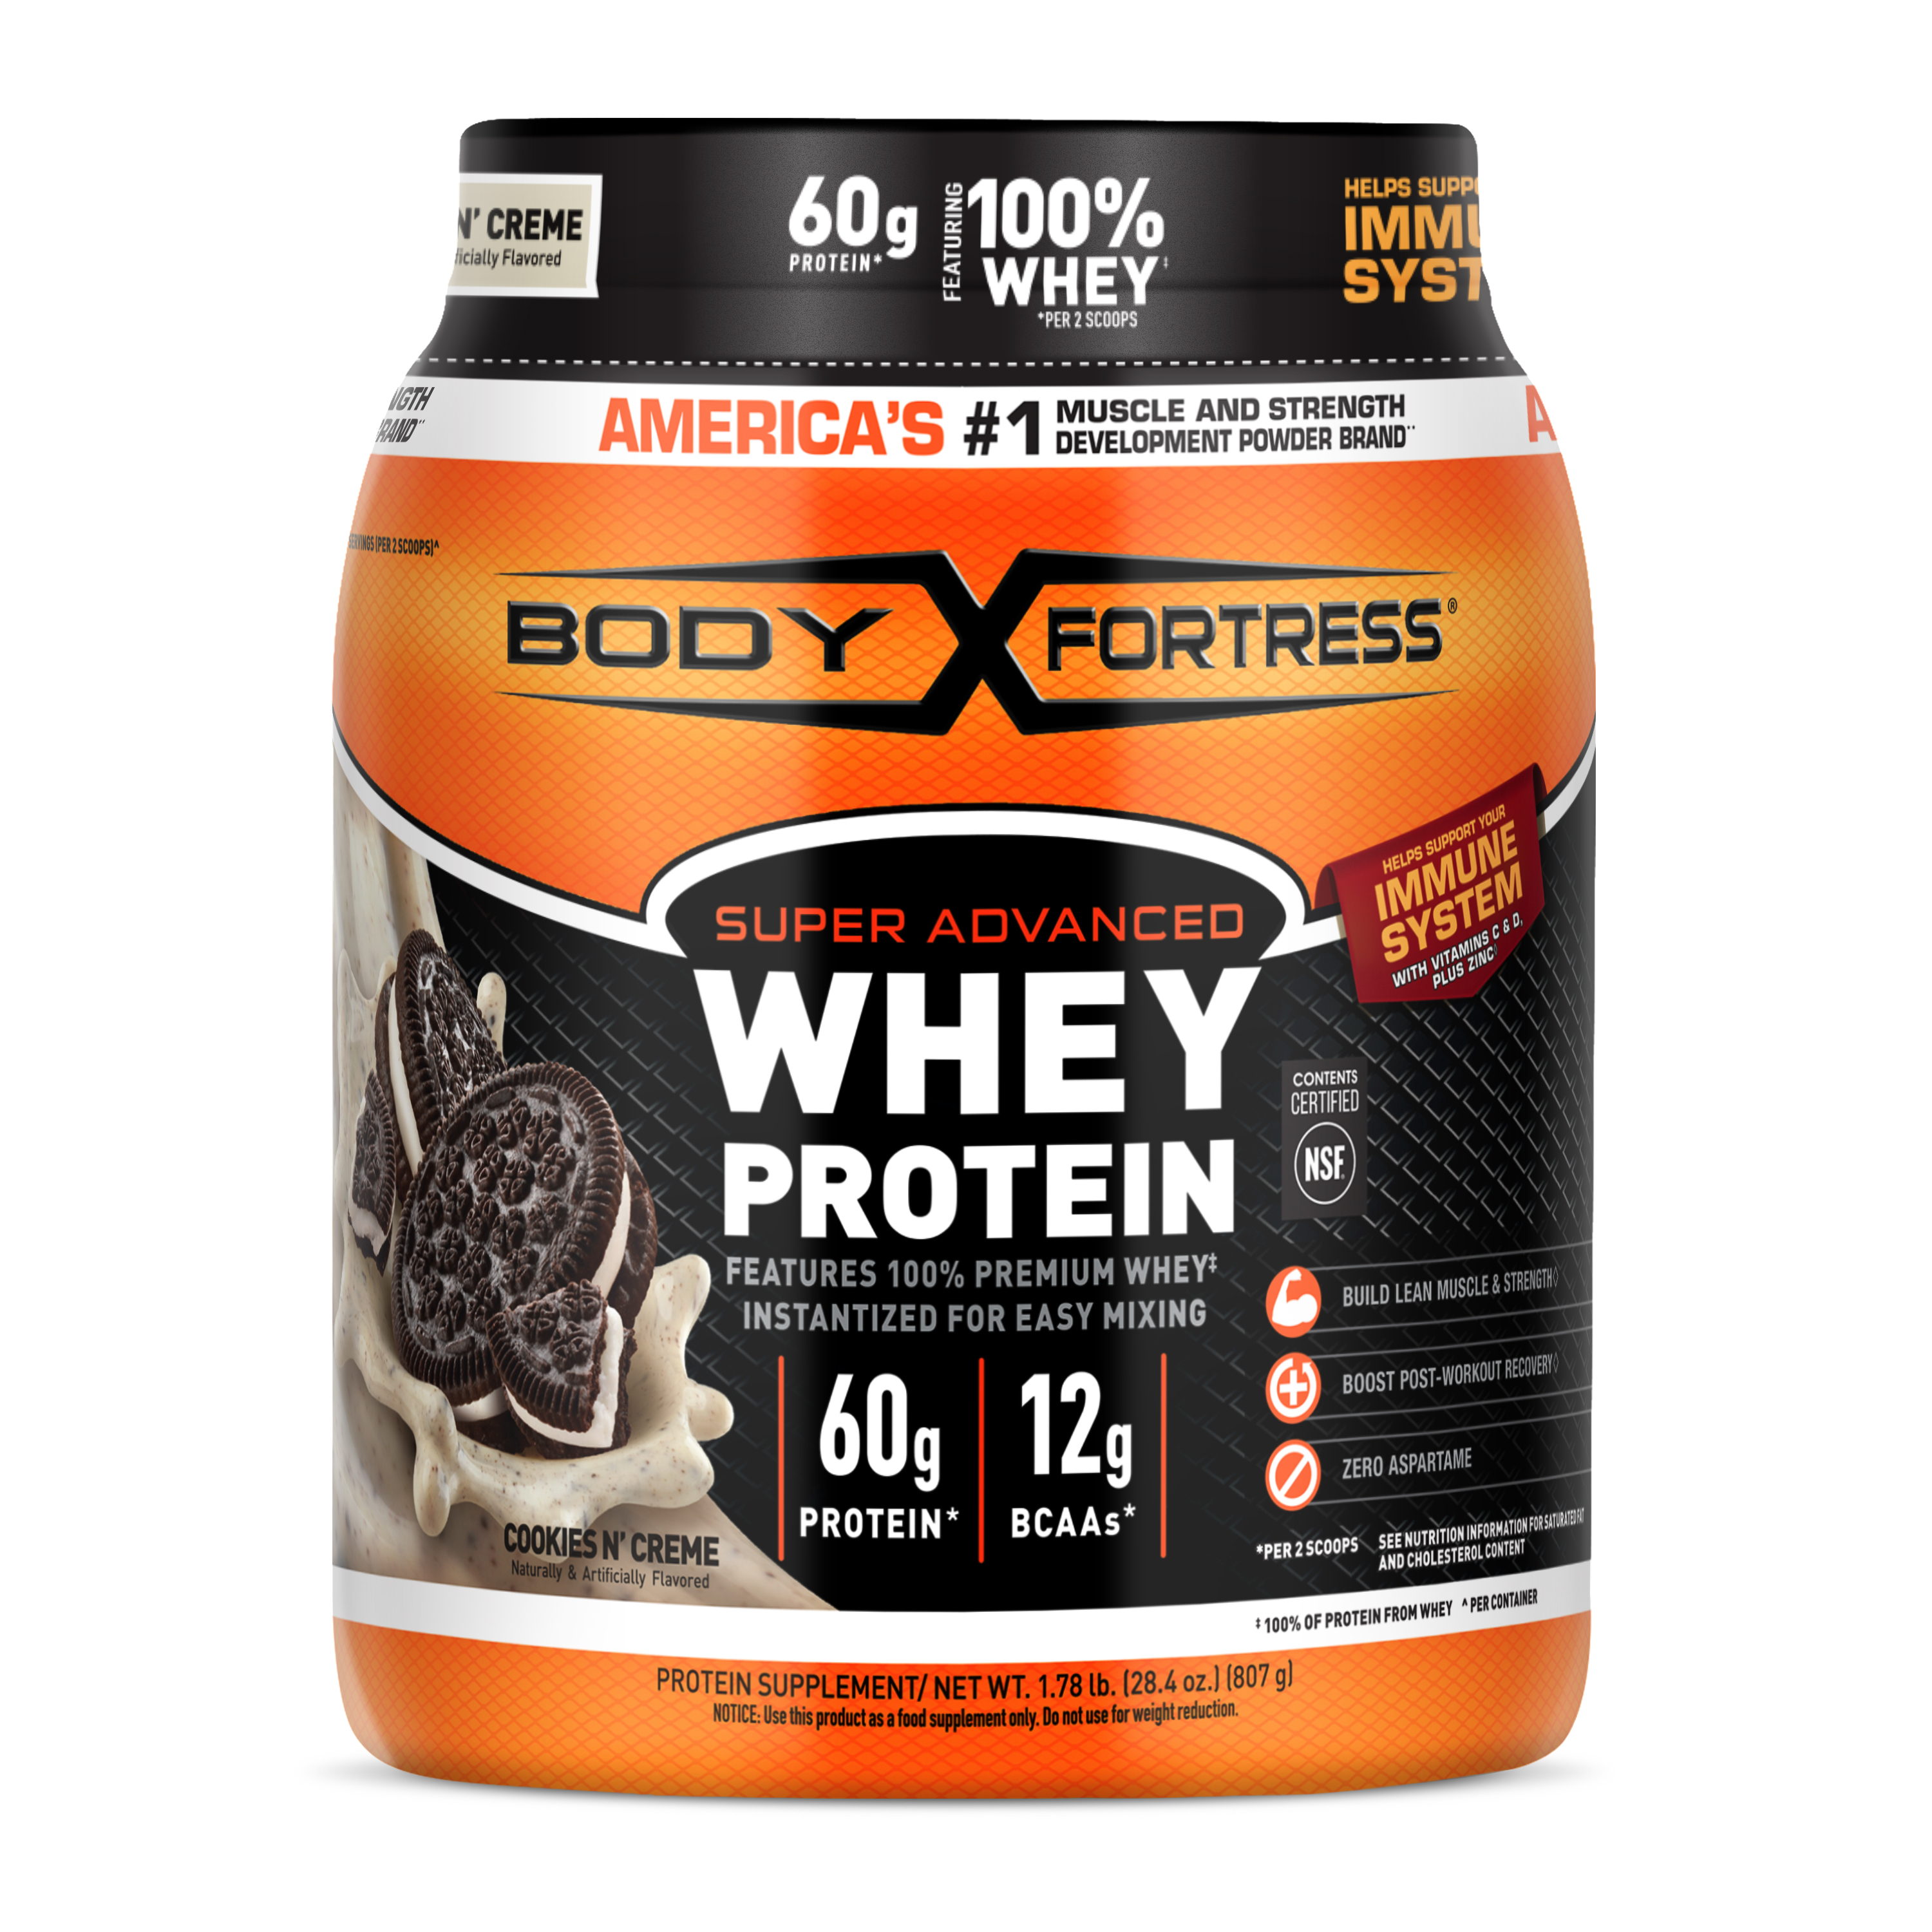 Body Fortress 100% Whey, Premium Protein Powder, Cookies N' Cream, 1.78lbs (Packaging May Vary) - image 1 of 7